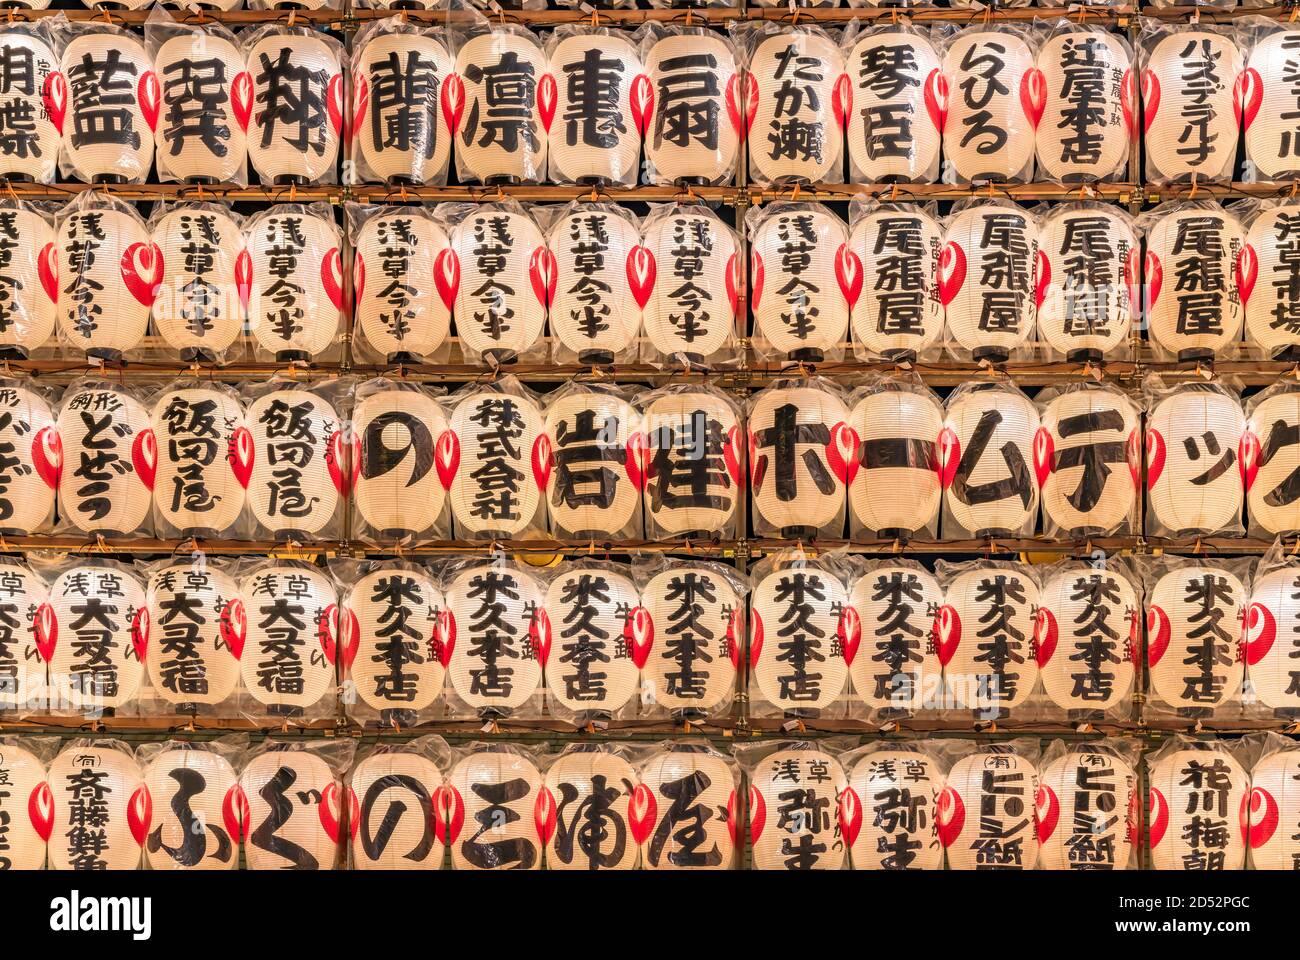 asakusa, japan - november 08 2019: Close-up of a huge wall of luminous japanese paper lanterns decorated with the handwritten names of patrons and spo Stock Photo